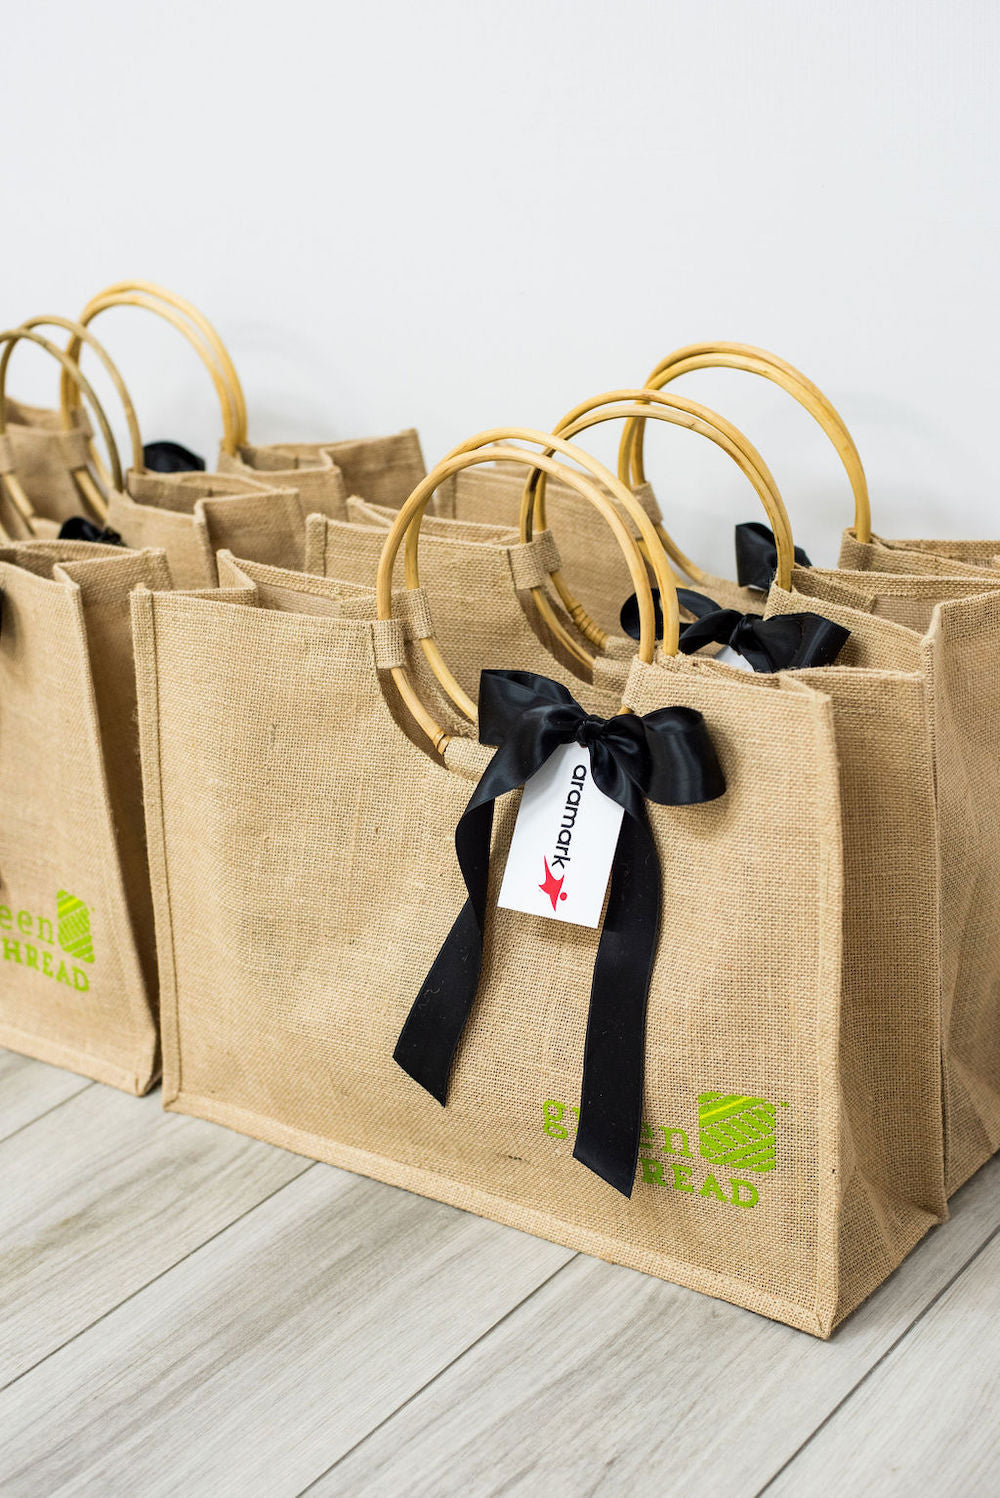 Our 10 Best Corporate Gift Bag Ideas | MARIGOLD & GREY